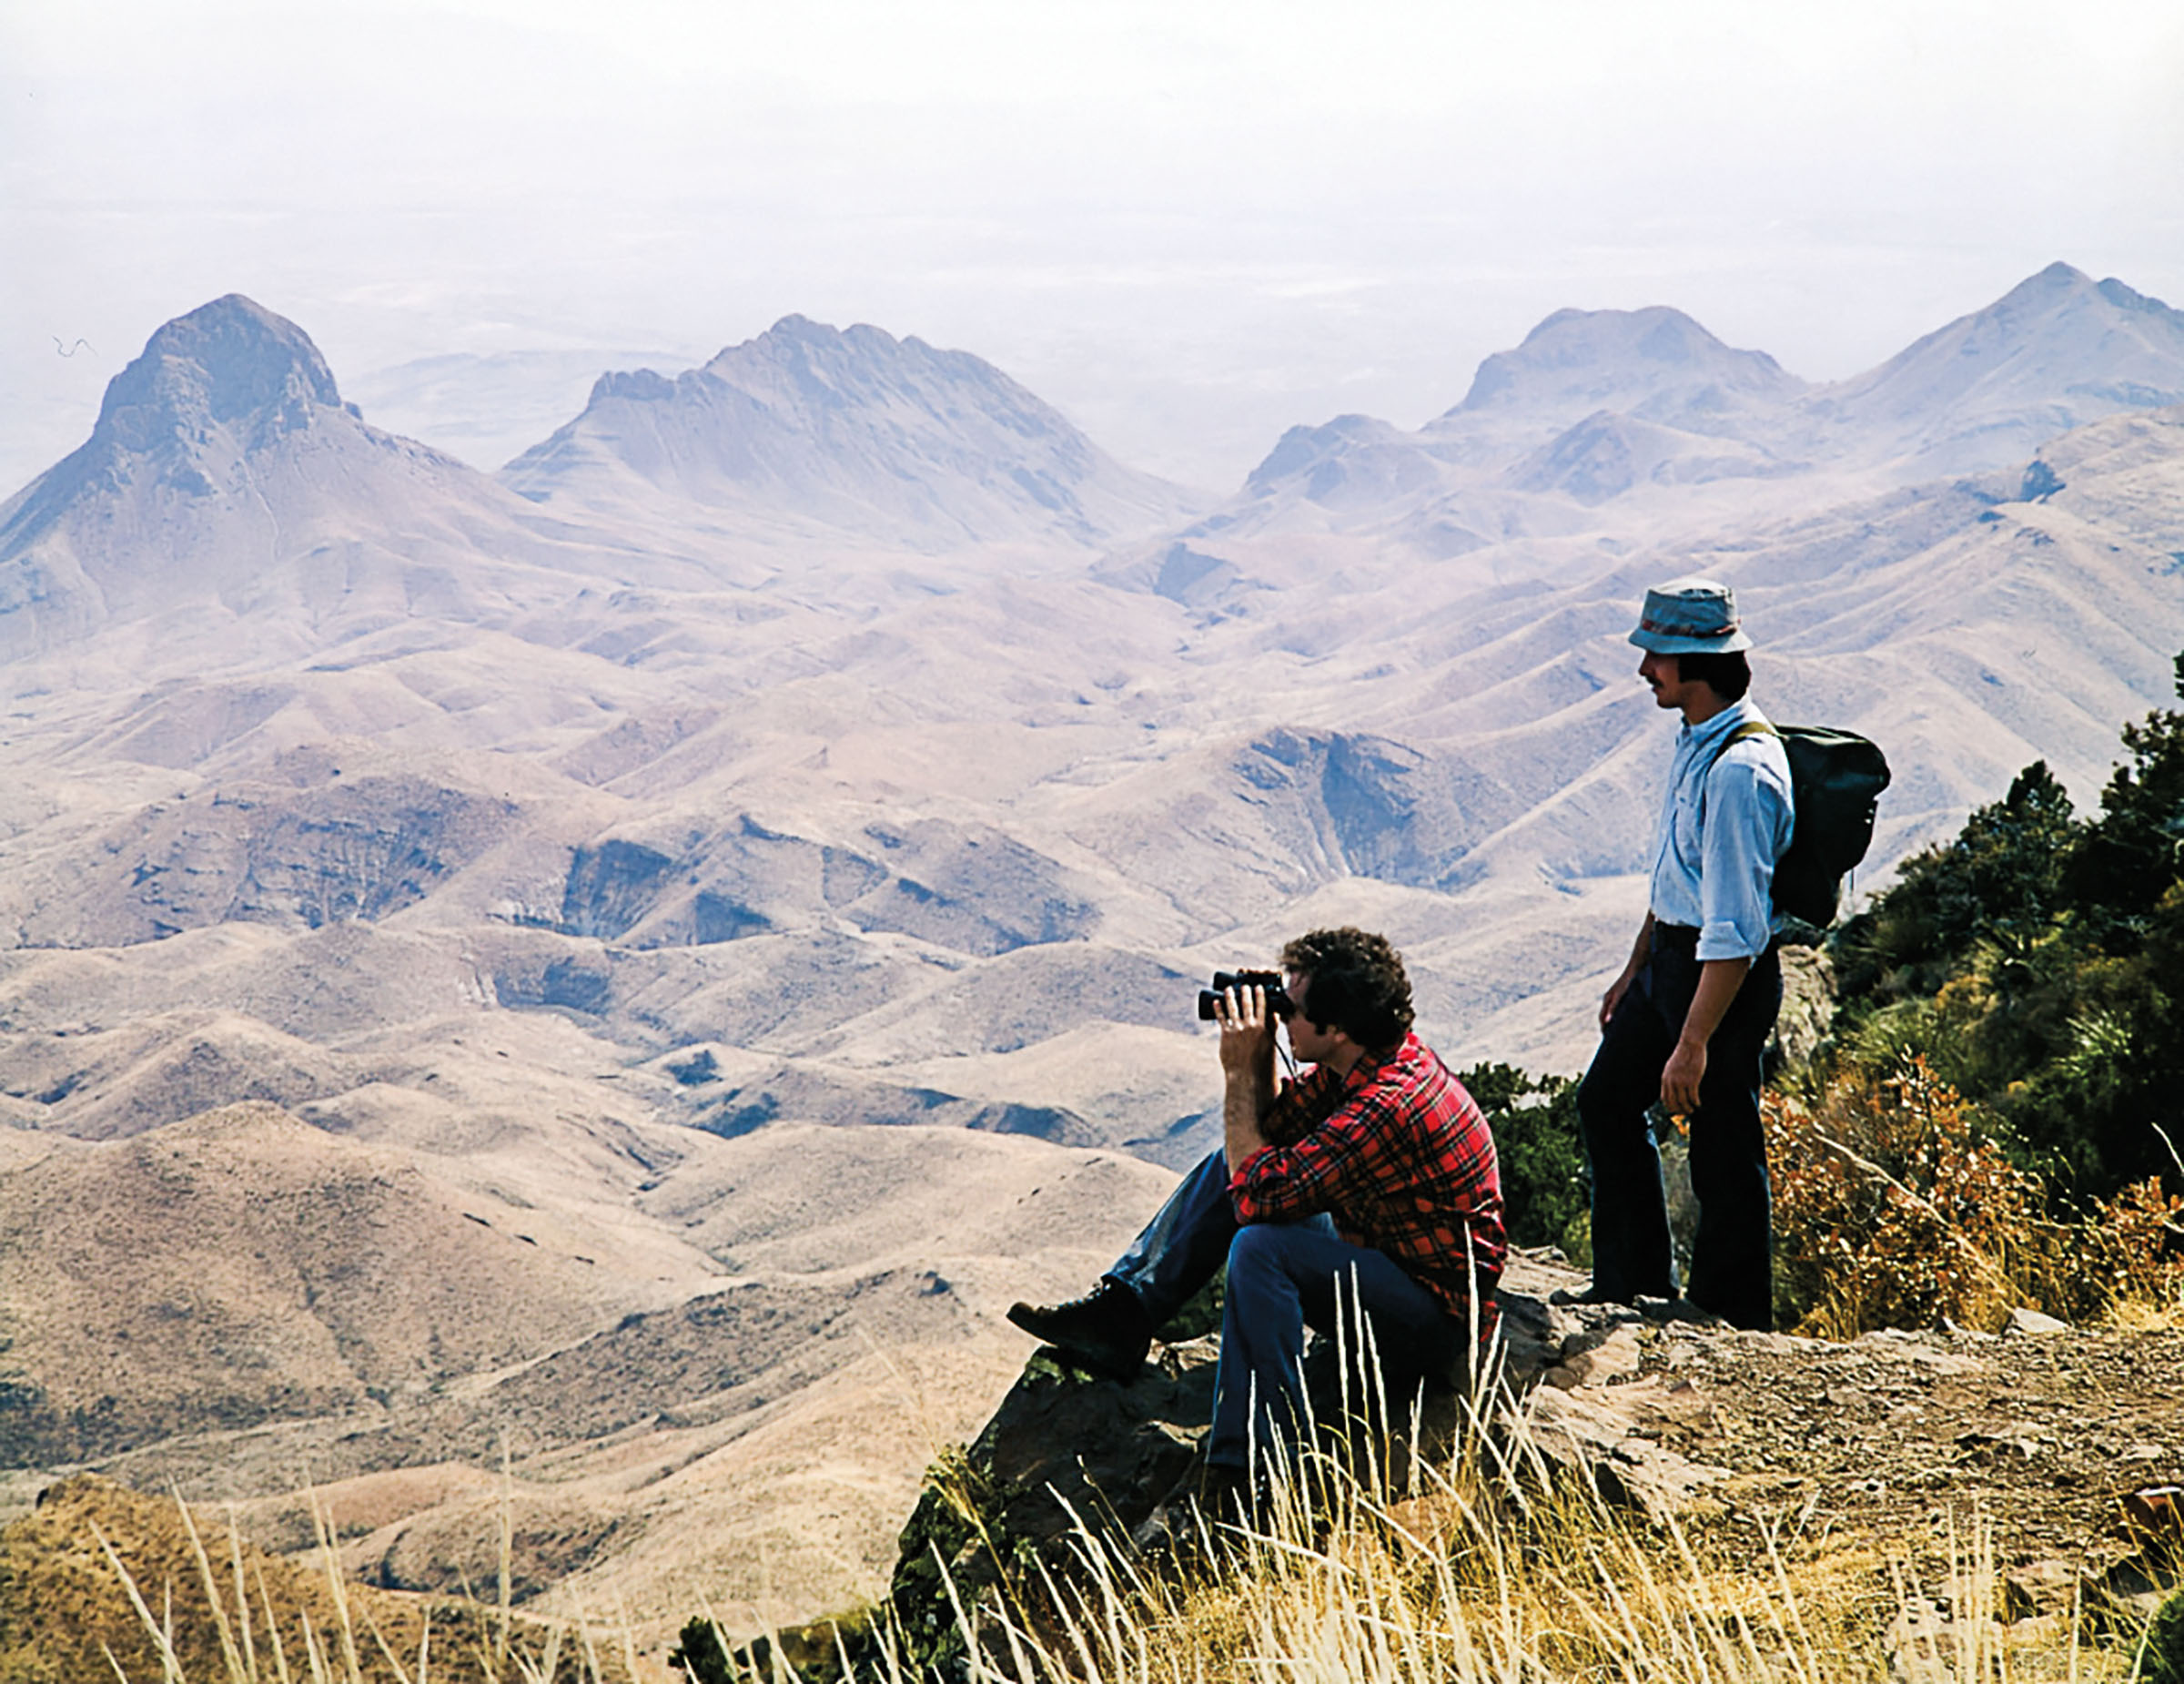 A pair of hikers stand on a bluff overlooking a valley and tall mountains